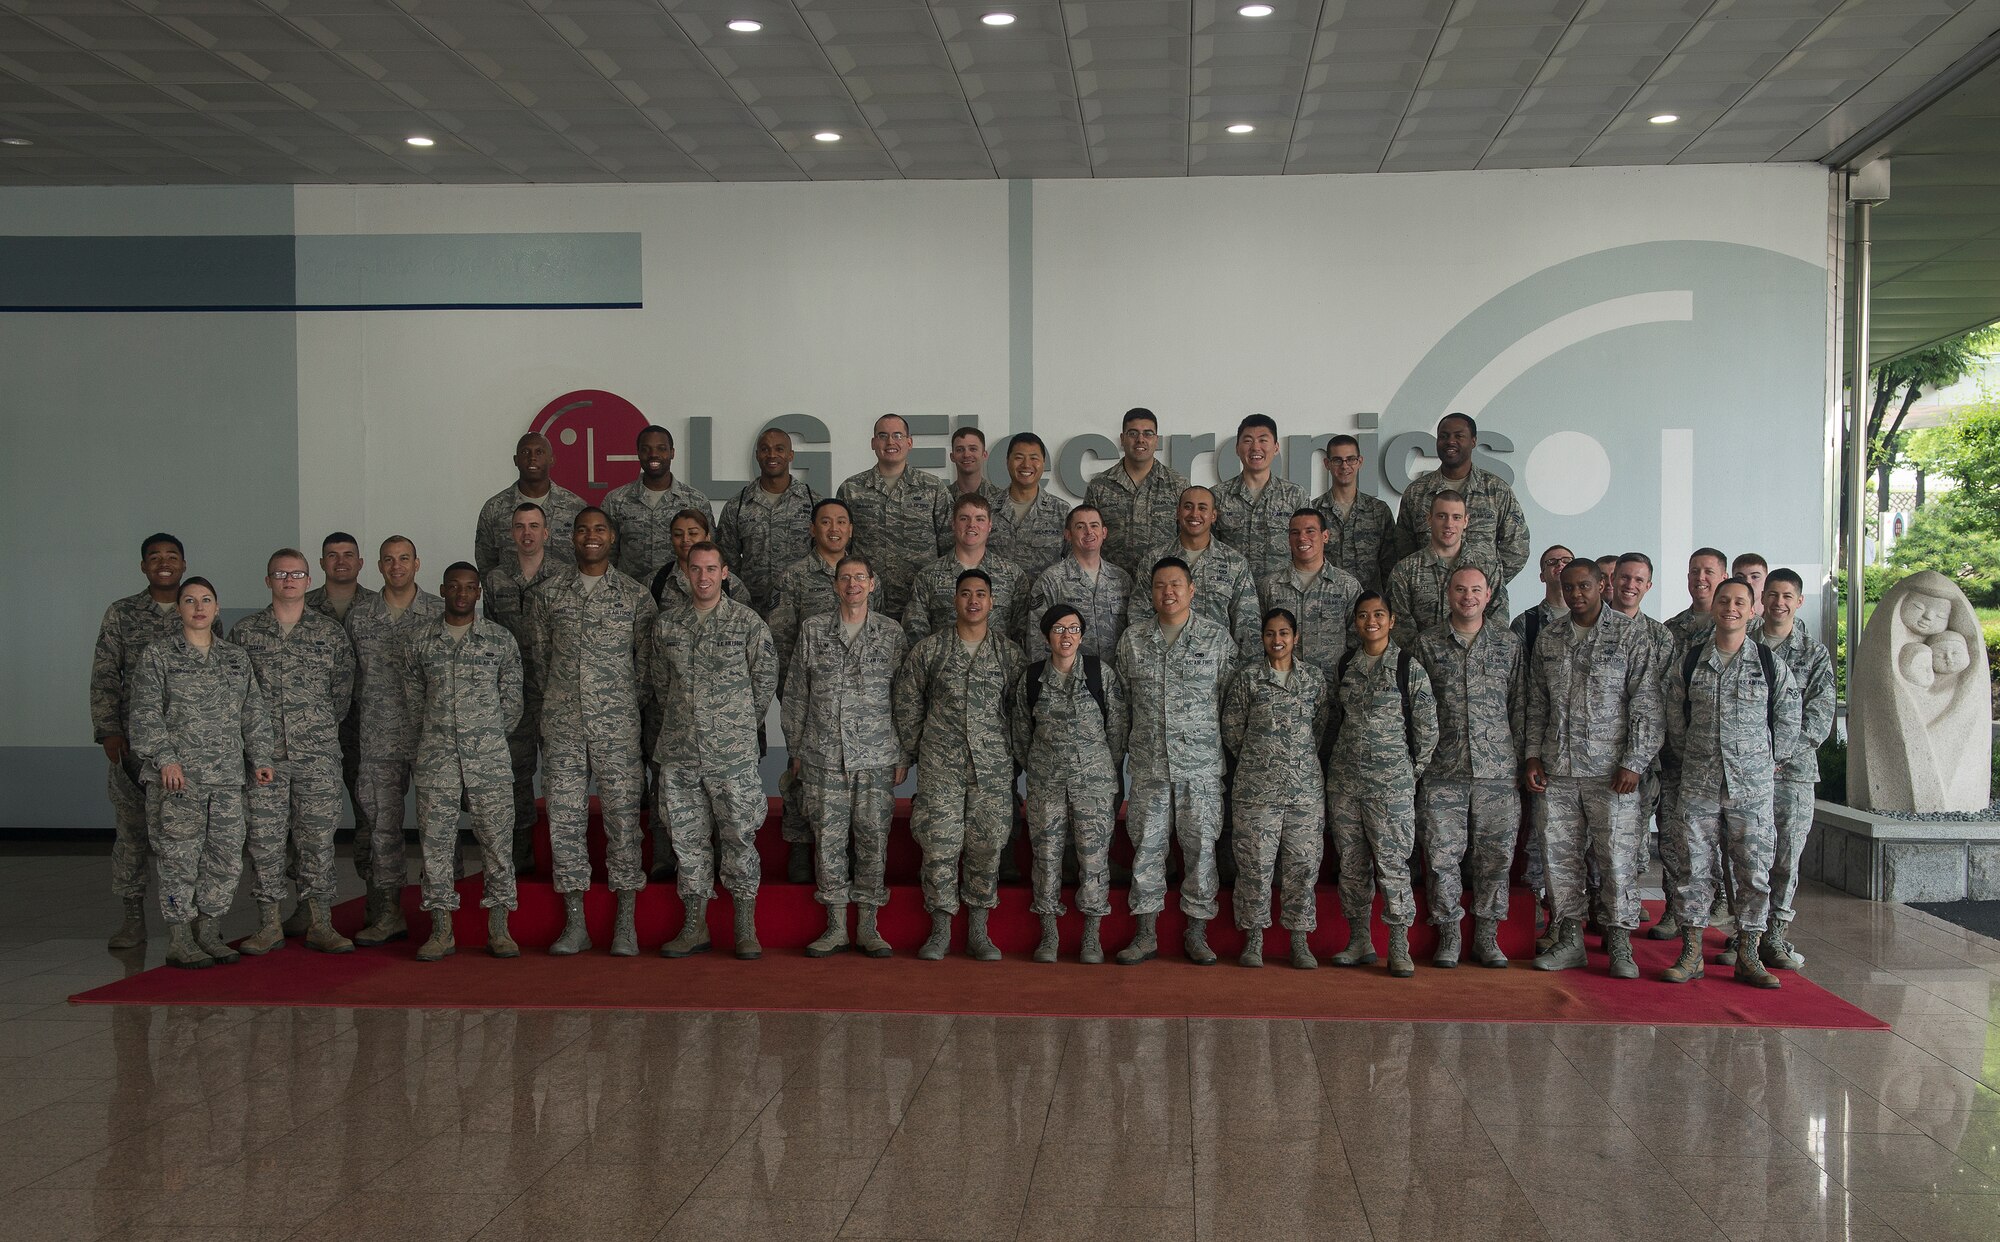 Airmen from Osan Air Base went on a tour of the LG Digital Park June 11, 2014, in Pyeongtaek, Republic of Korea. The tour was intended to give Airmen opportunities to see what's in the city of Pyeongtaek around the base. (U.S. Air Force photo by Staff Sgt. Jake Barreiro)